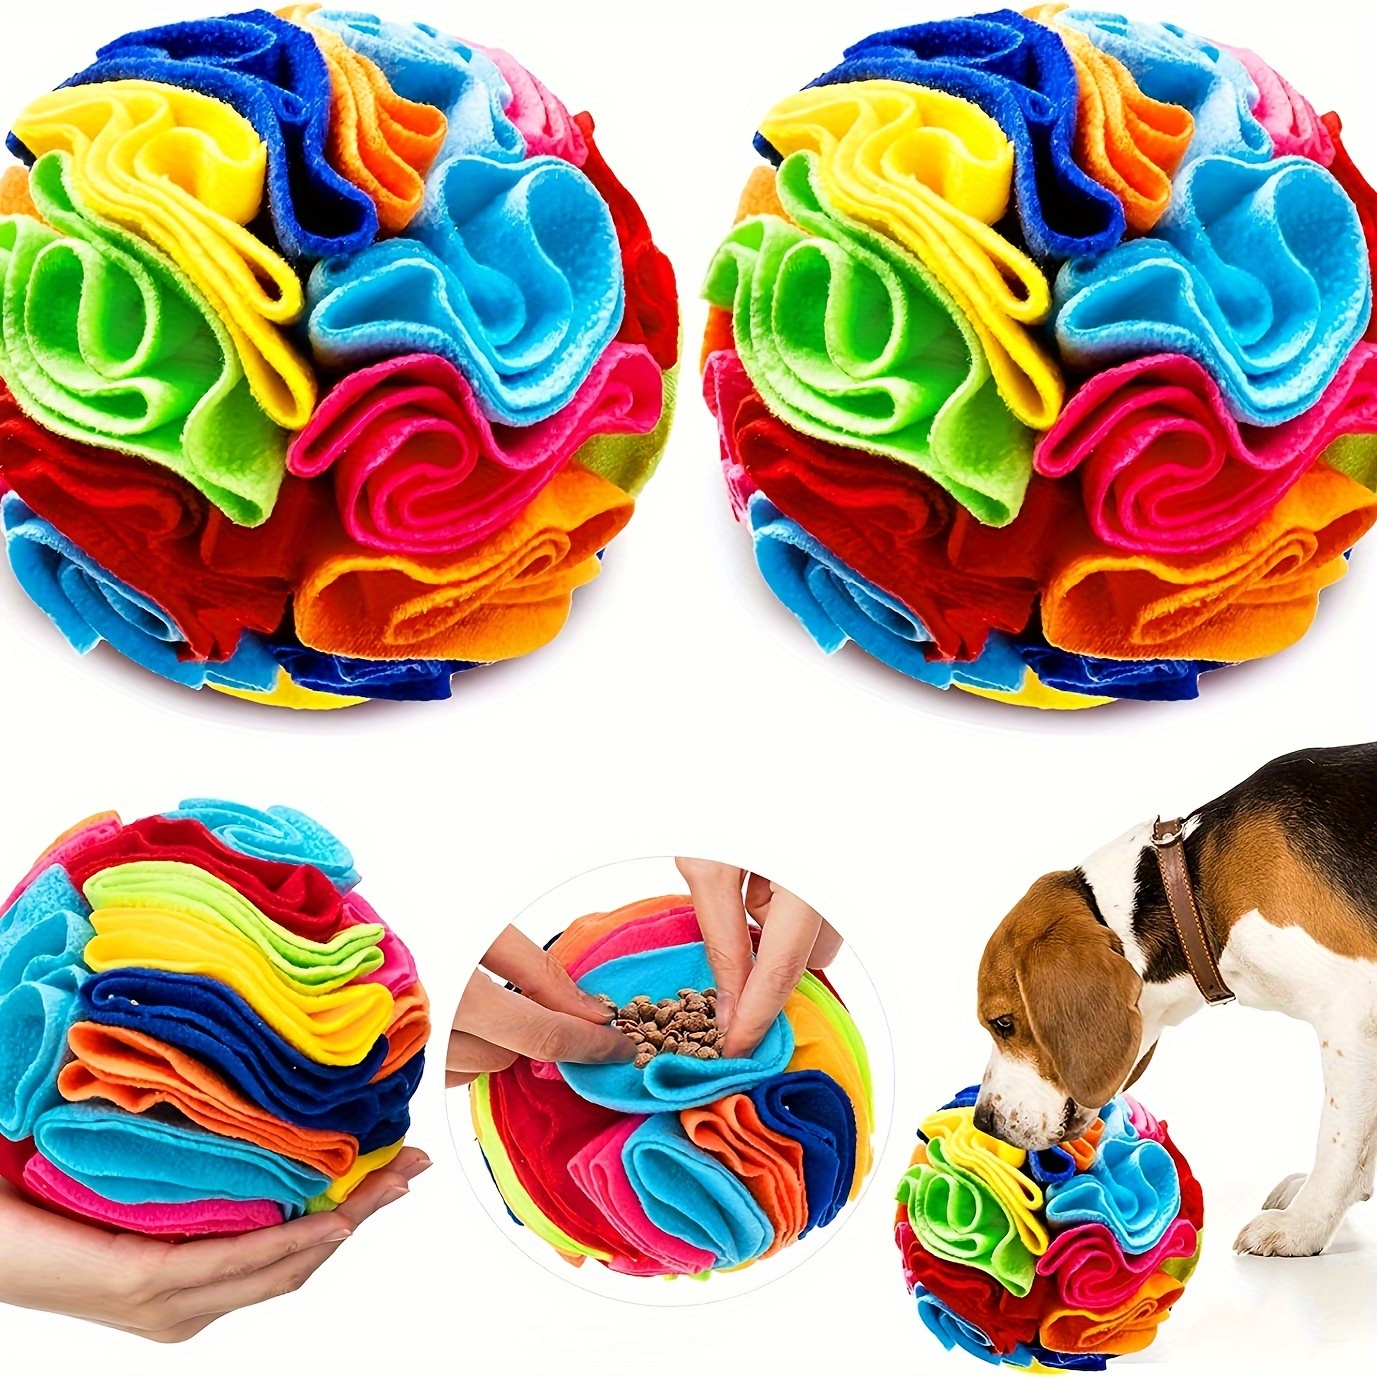 Durable Interactive Pet Snuffle Ball Toy For Dogs - Encourages